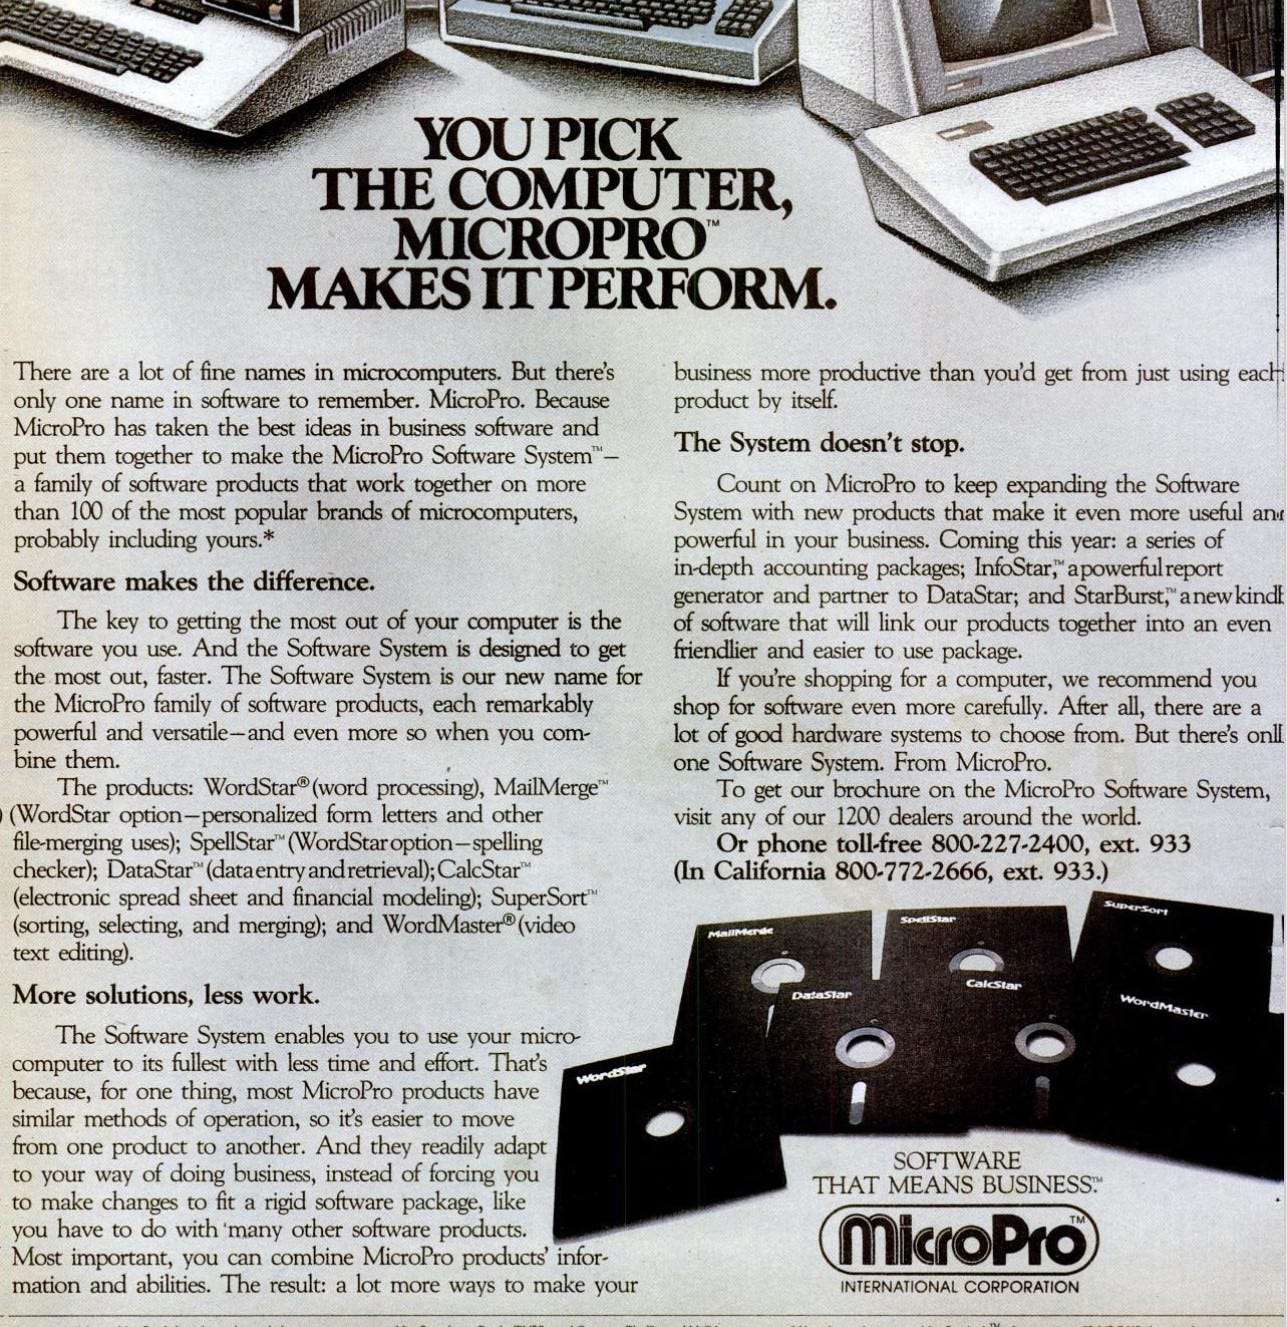 Advertisement for Micropro showing spelling sorting etc all as separate products.